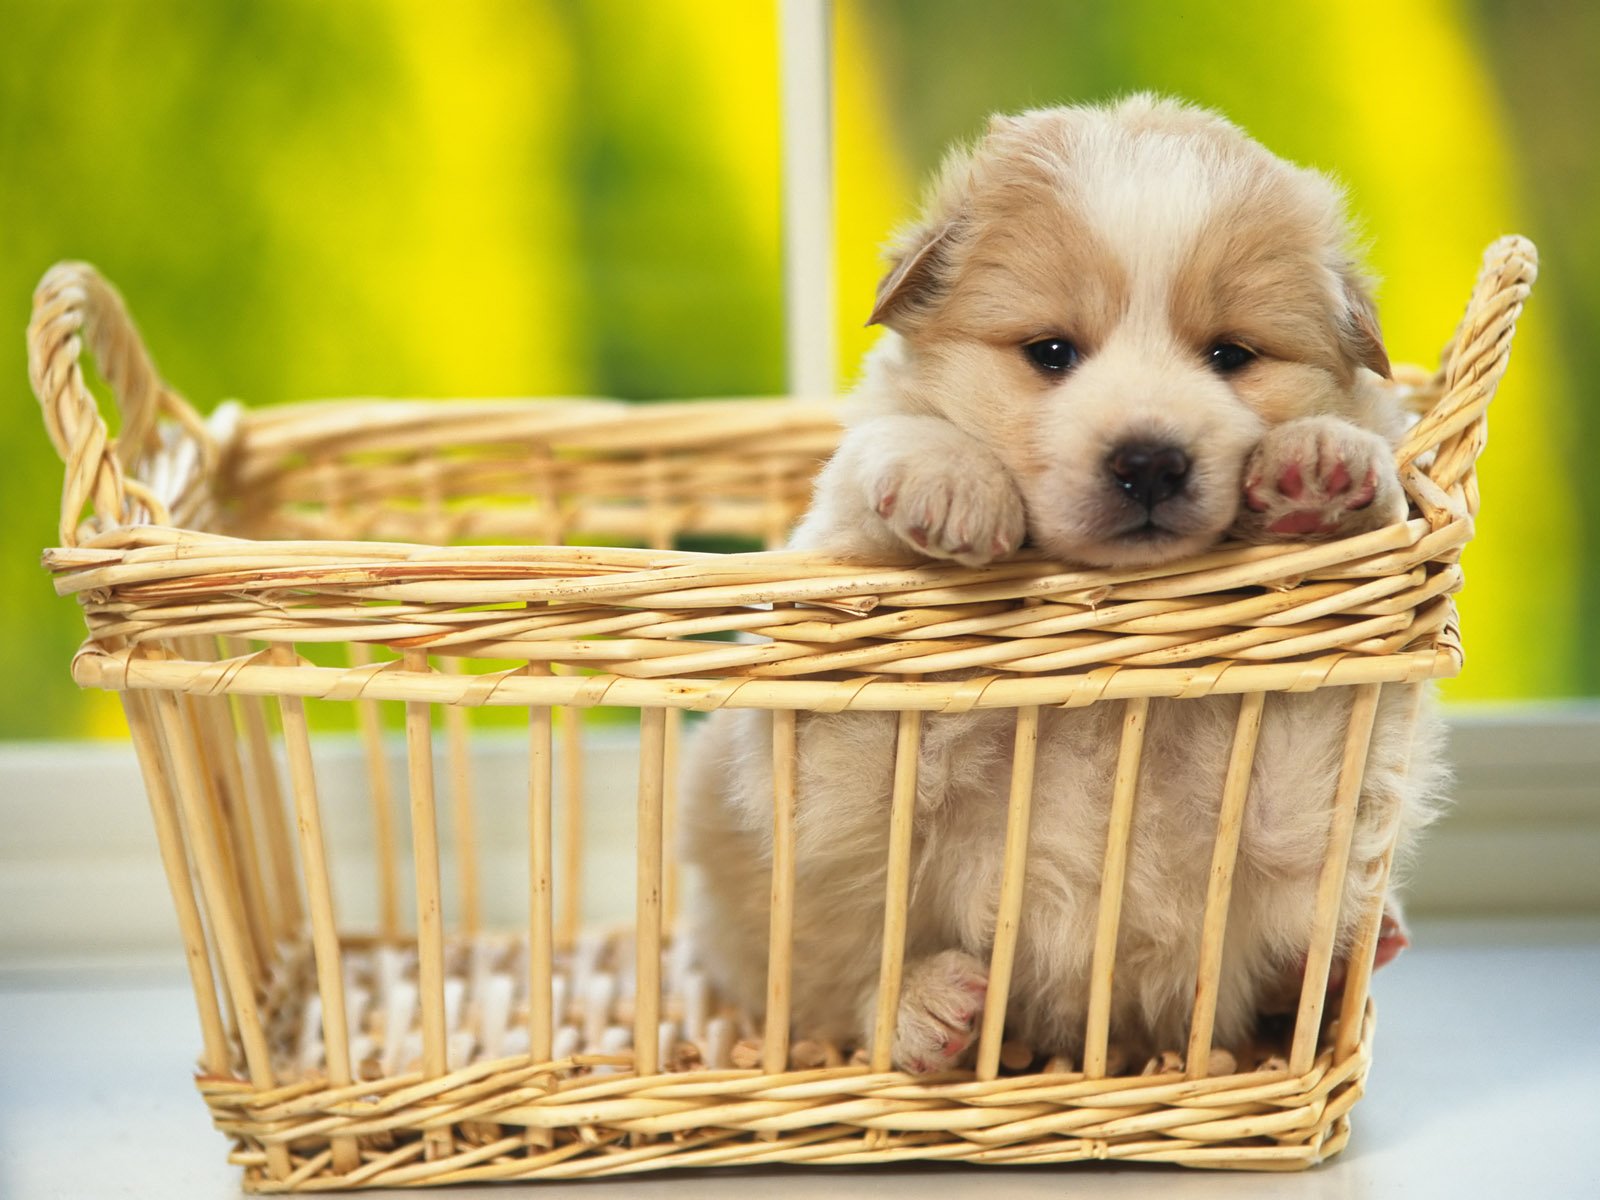 animals, Dogs, Puppies, Baskets, Pets Wallpaper